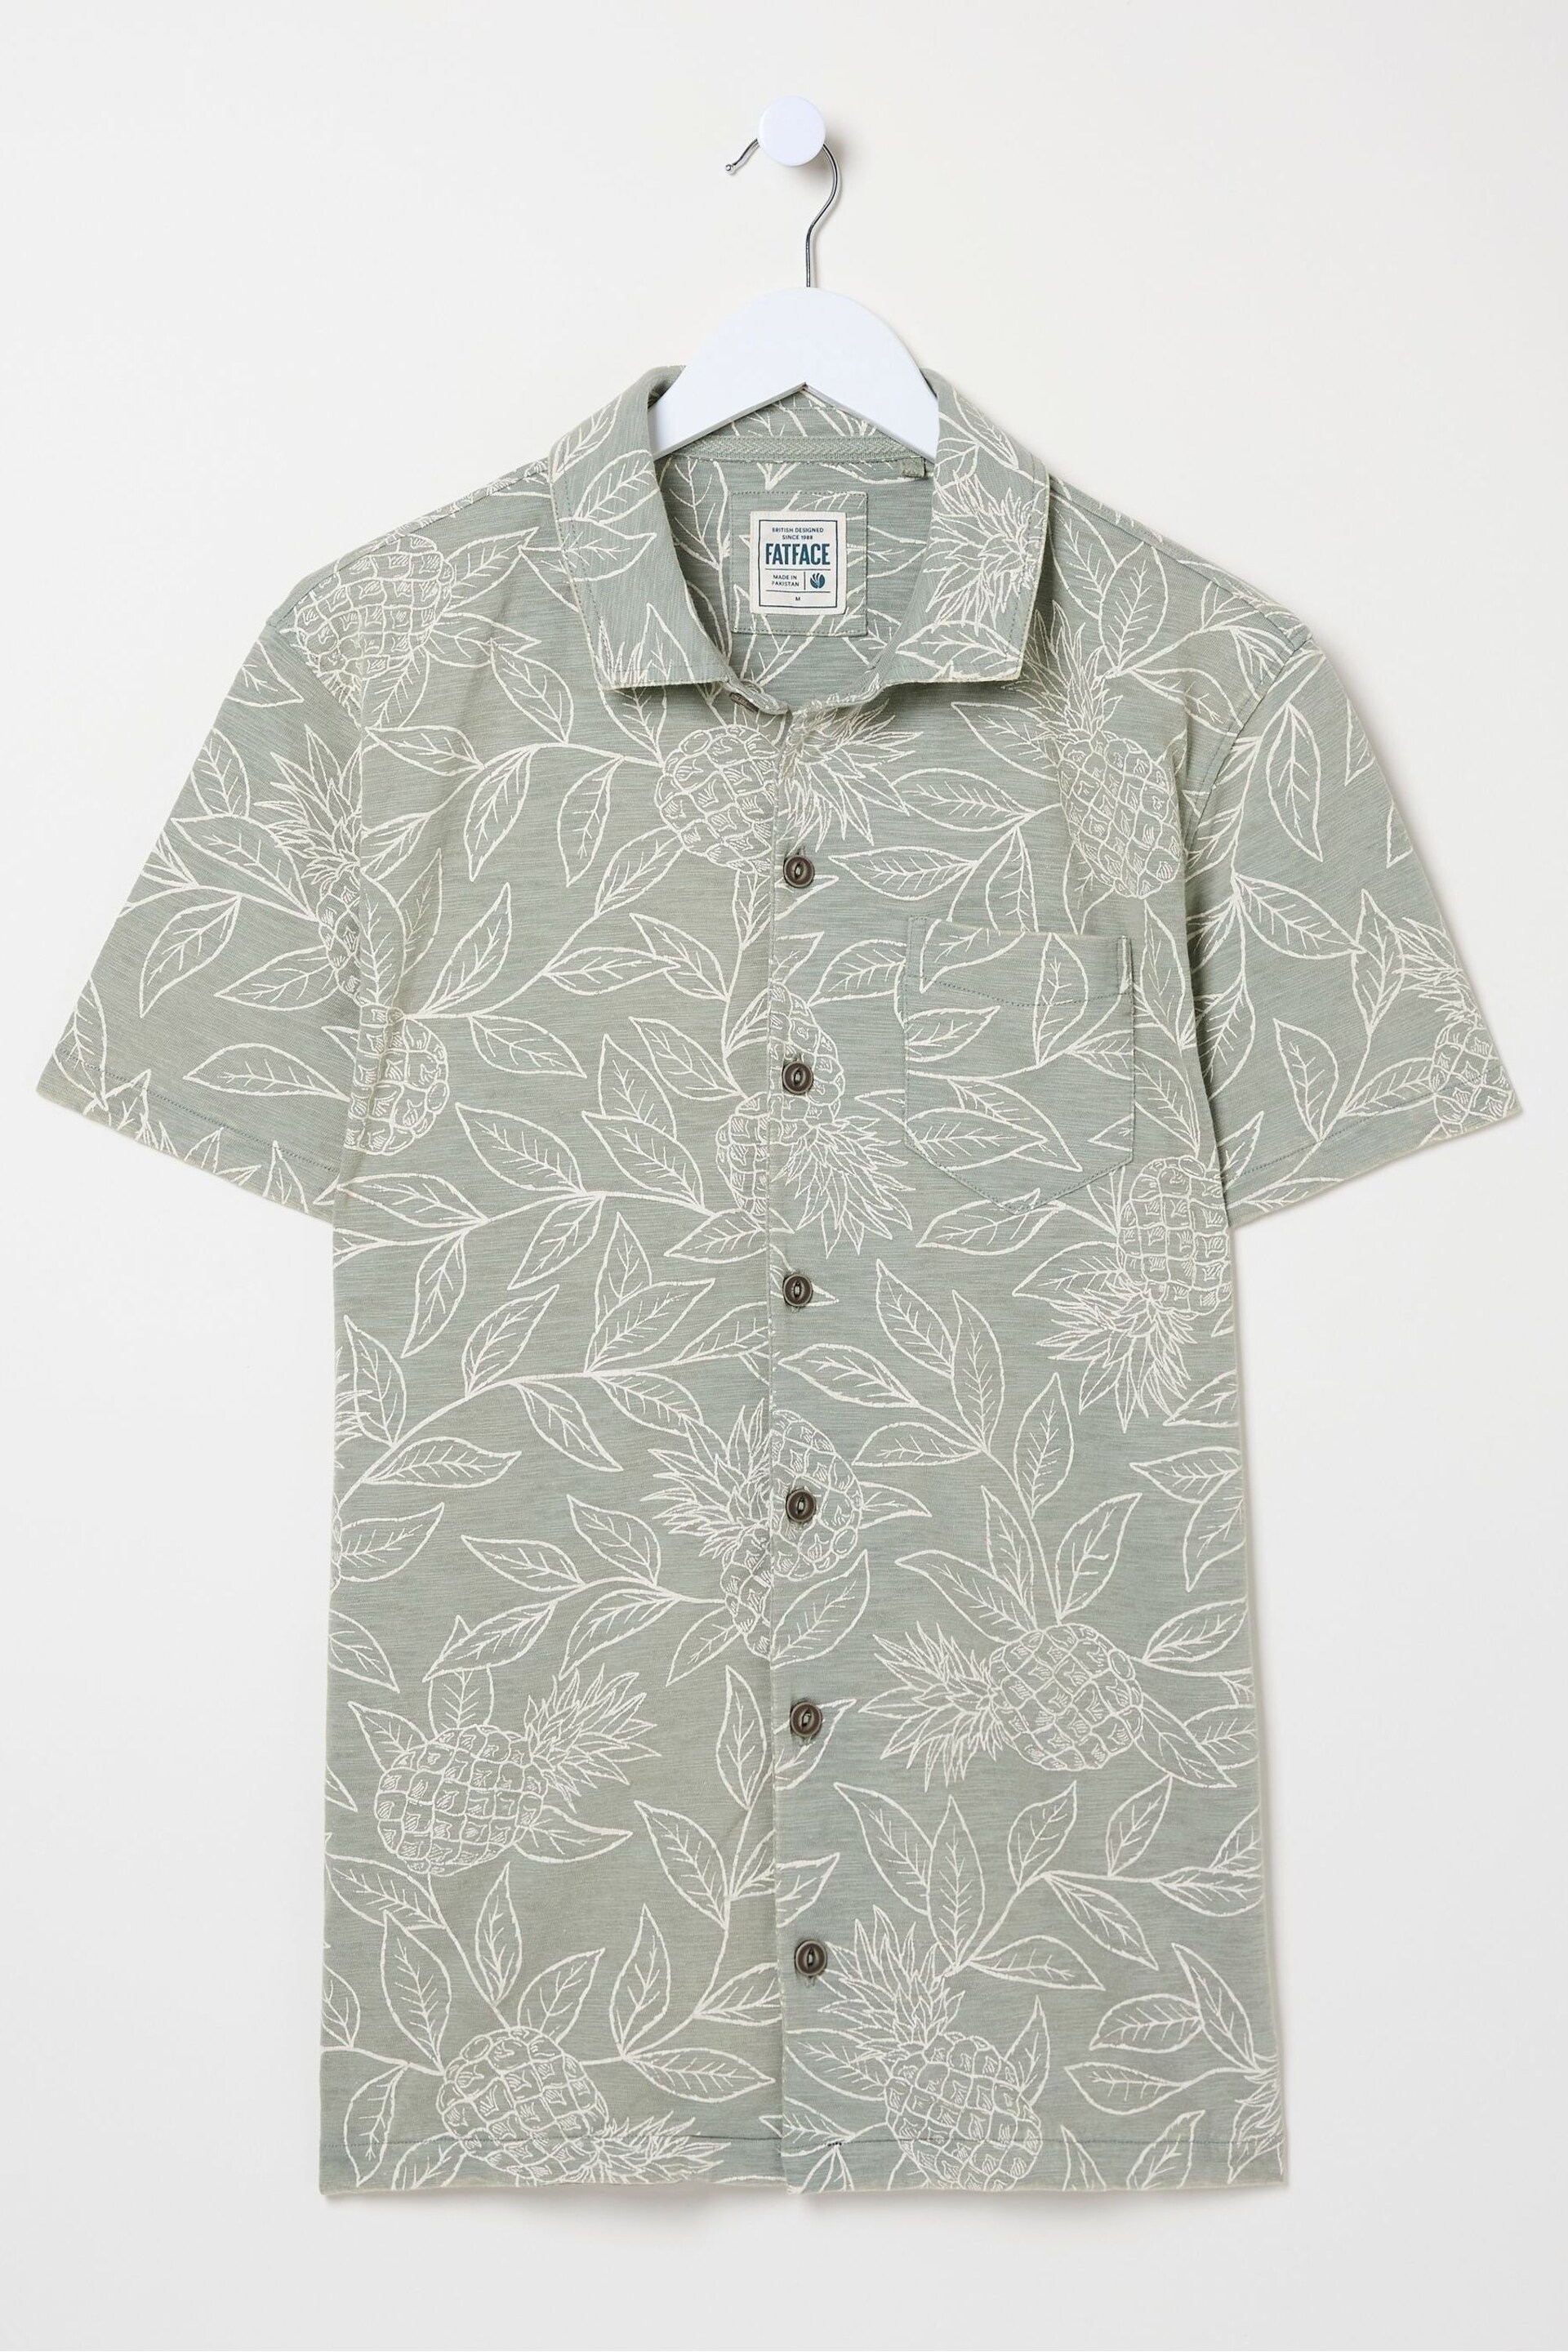 FatFace Green Truro Leaf Jersey Shirt - Image 5 of 5